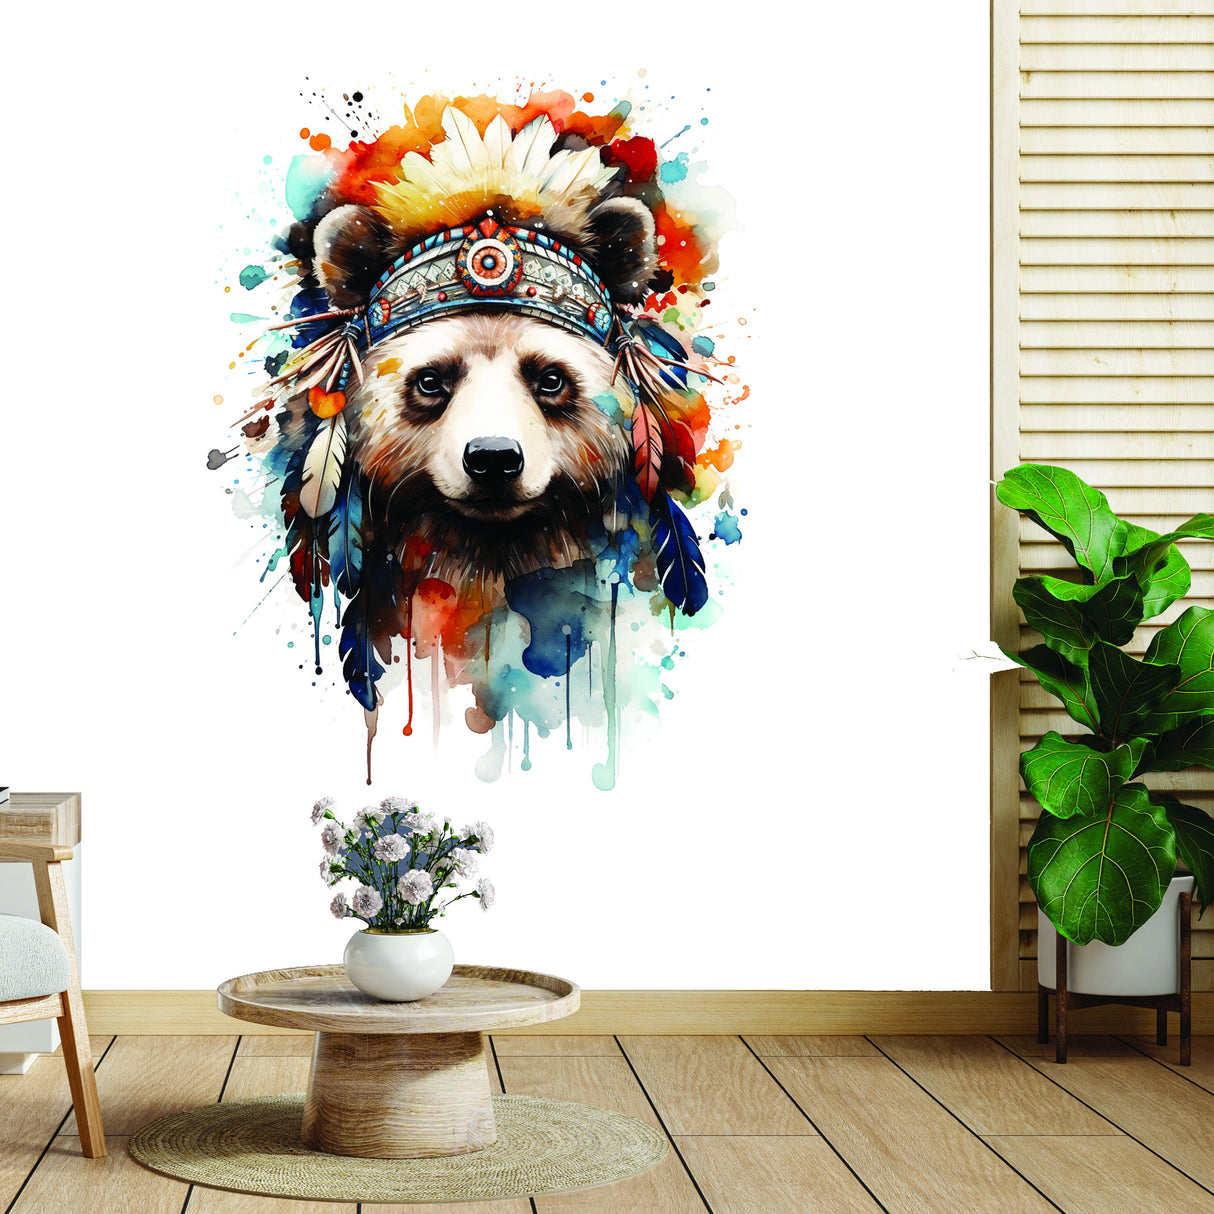 Watercolor Baby Panda Wall Decal - Panda Bear with Indian Feather Hat Nursery Sticker